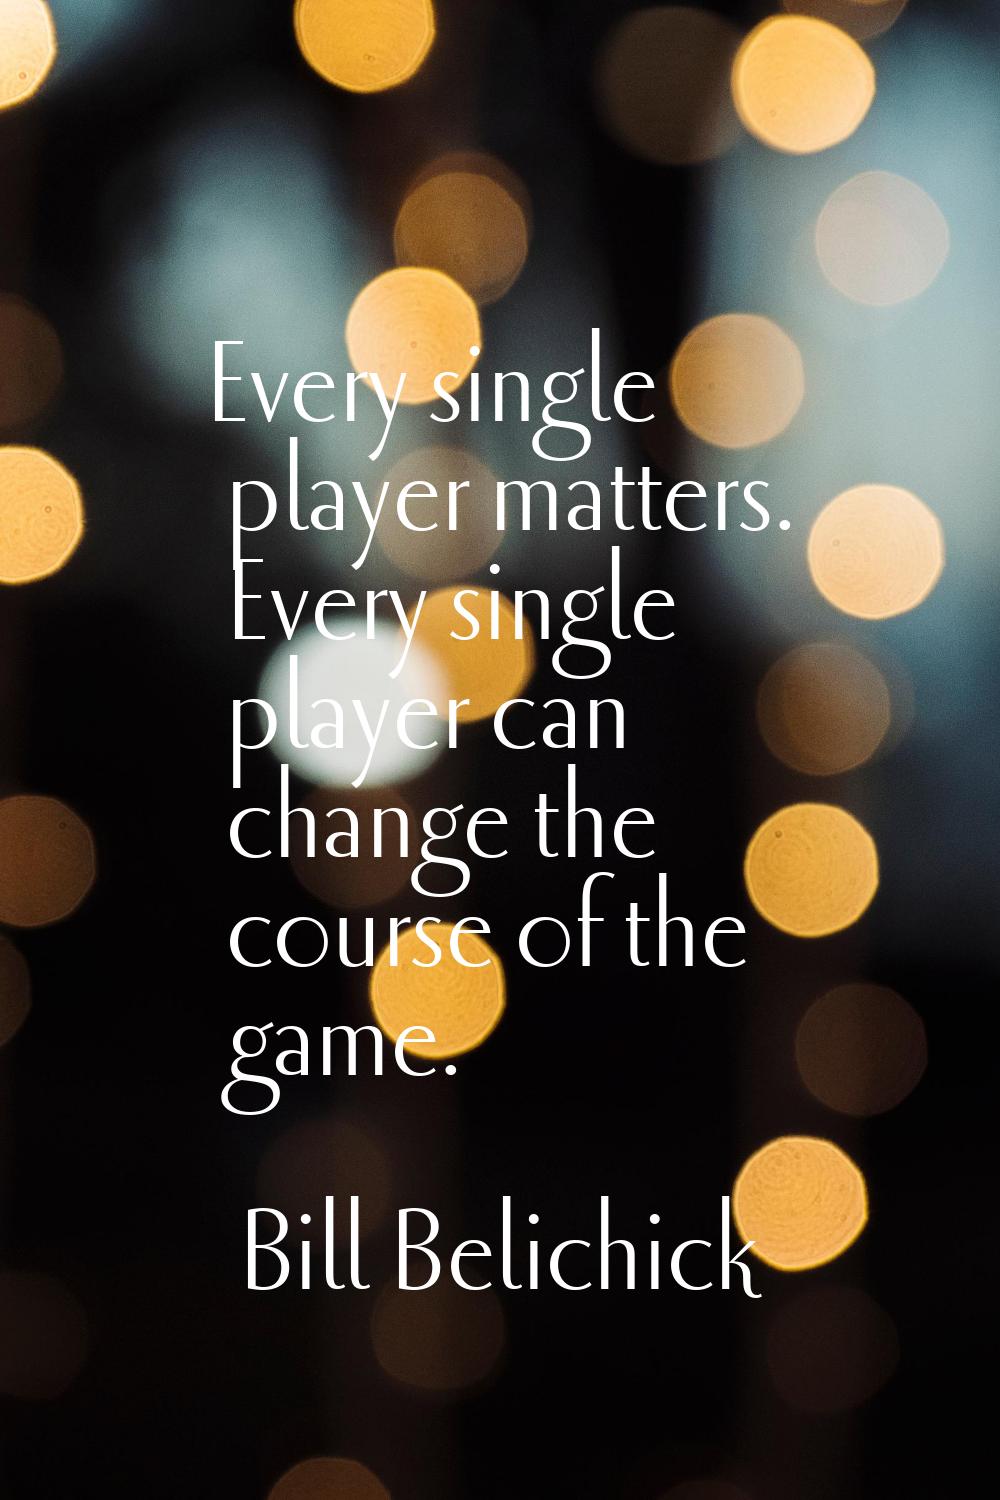 Every single player matters. Every single player can change the course of the game.